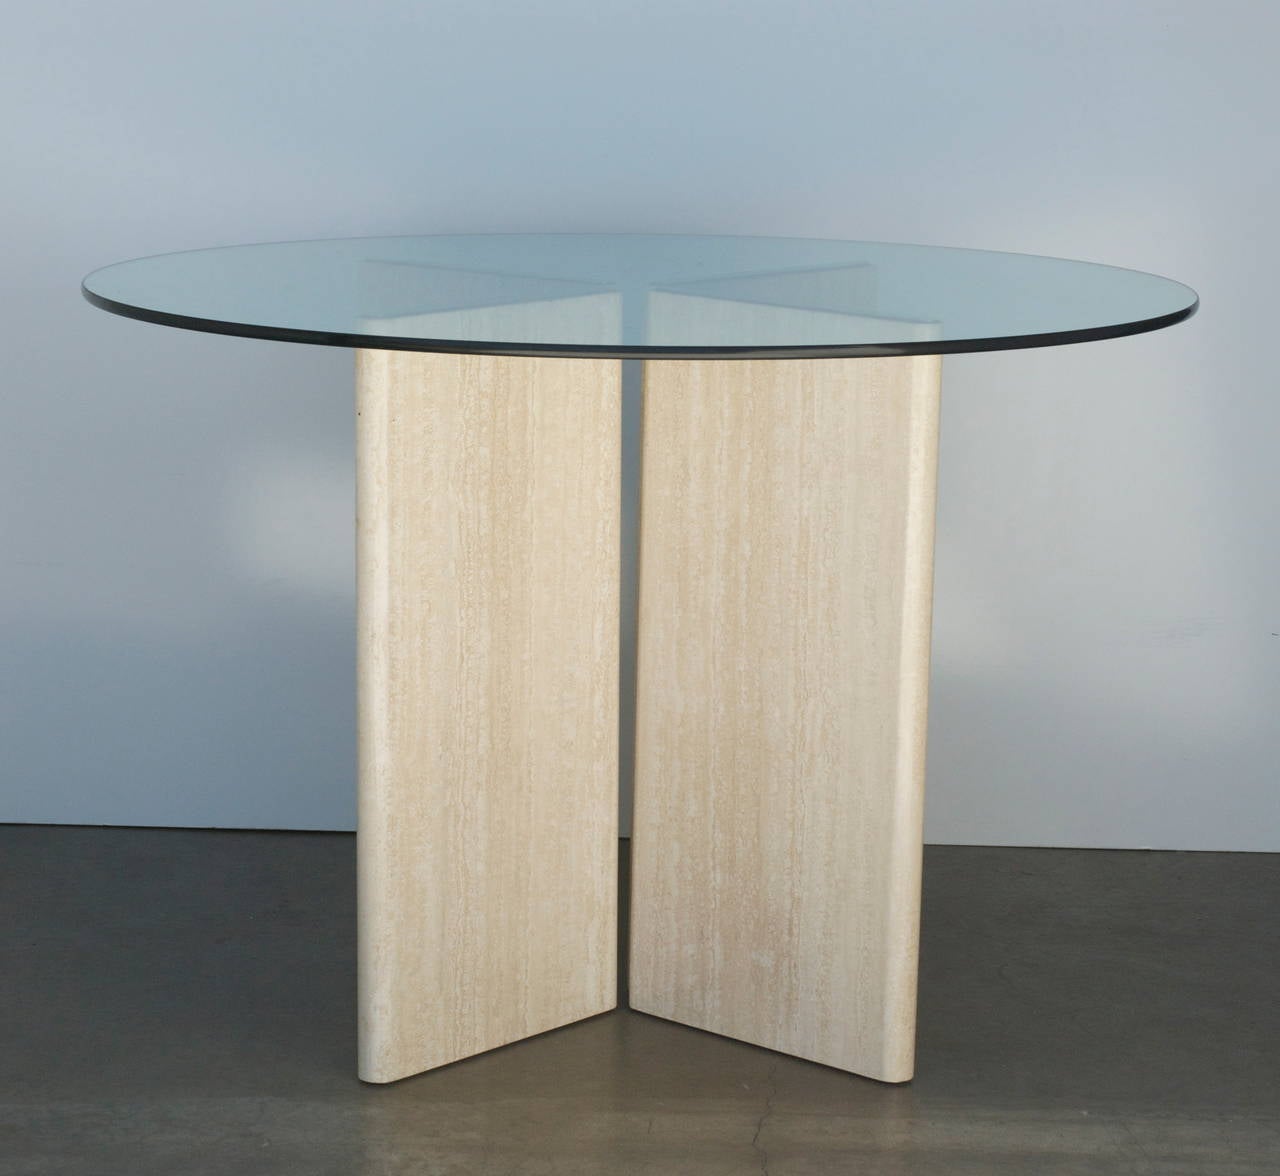 These versatile travertine and brass bases can be topped with the glass of your choice. It can be a console, a dining table, an entry table, or a writing table.
The travertine has been professionally cleaned and polished. The stone bases are